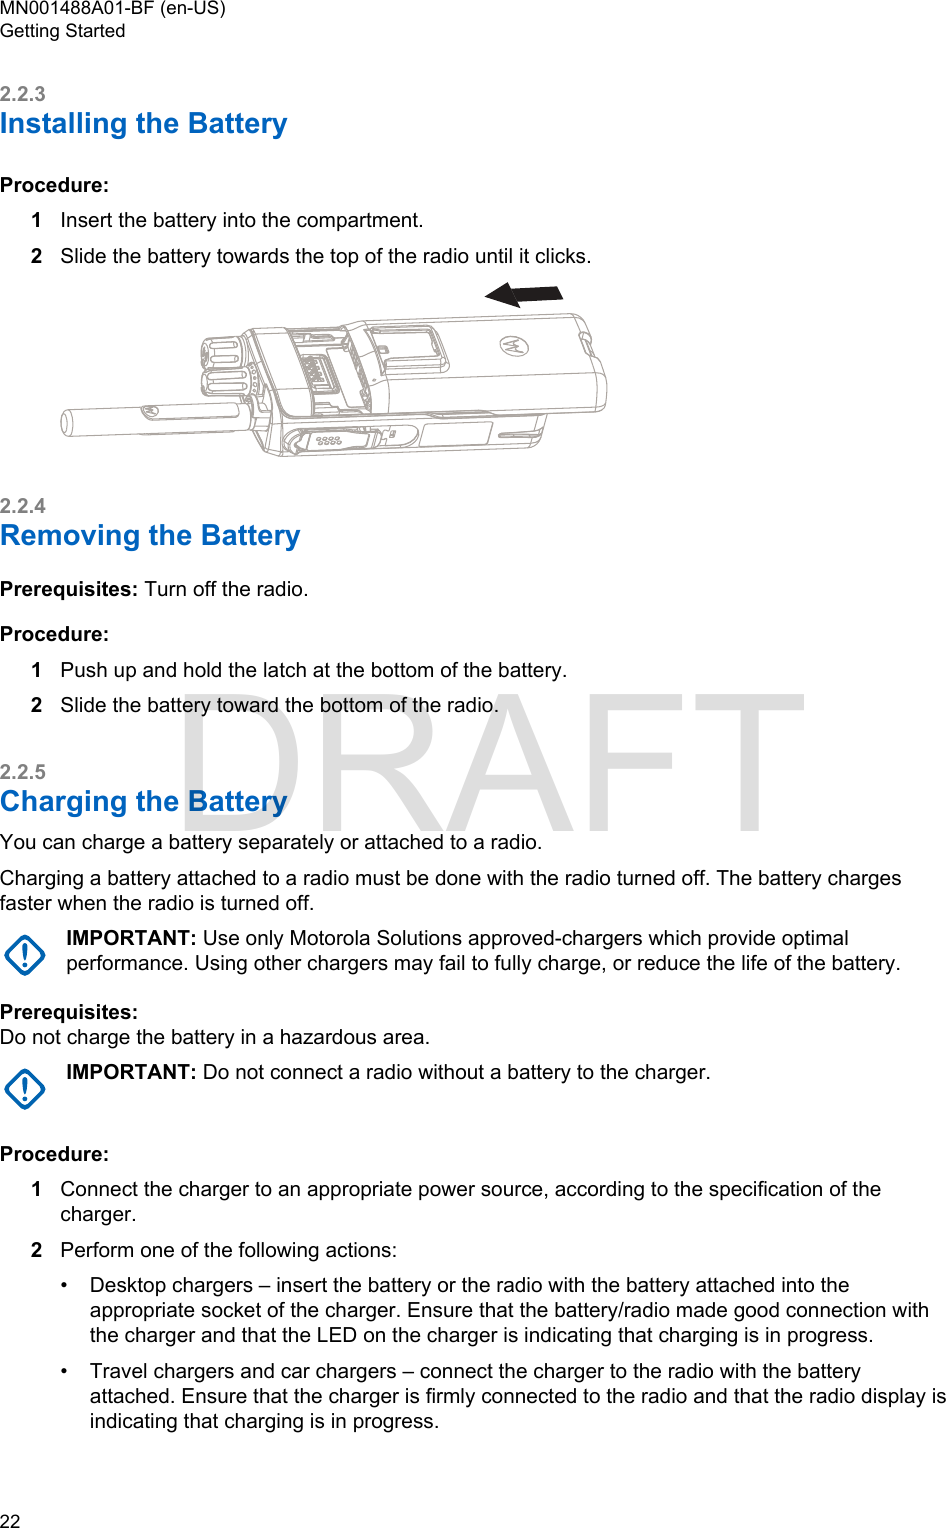 2.2.3Installing the BatteryProcedure:1Insert the battery into the compartment.2Slide the battery towards the top of the radio until it clicks.2.2.4Removing the BatteryPrerequisites: Turn off the radio.Procedure:1Push up and hold the latch at the bottom of the battery.2Slide the battery toward the bottom of the radio.2.2.5Charging the BatteryYou can charge a battery separately or attached to a radio.Charging a battery attached to a radio must be done with the radio turned off. The battery chargesfaster when the radio is turned off.IMPORTANT: Use only Motorola Solutions approved-chargers which provide optimalperformance. Using other chargers may fail to fully charge, or reduce the life of the battery.Prerequisites:Do not charge the battery in a hazardous area.IMPORTANT: Do not connect a radio without a battery to the charger.Procedure:1Connect the charger to an appropriate power source, according to the specification of thecharger.2Perform one of the following actions:•Desktop chargers – insert the battery or the radio with the battery attached into theappropriate socket of the charger. Ensure that the battery/radio made good connection withthe charger and that the LED on the charger is indicating that charging is in progress.• Travel chargers and car chargers – connect the charger to the radio with the batteryattached. Ensure that the charger is firmly connected to the radio and that the radio display isindicating that charging is in progress.MN001488A01-BF (en-US)Getting Started22  DRAFT